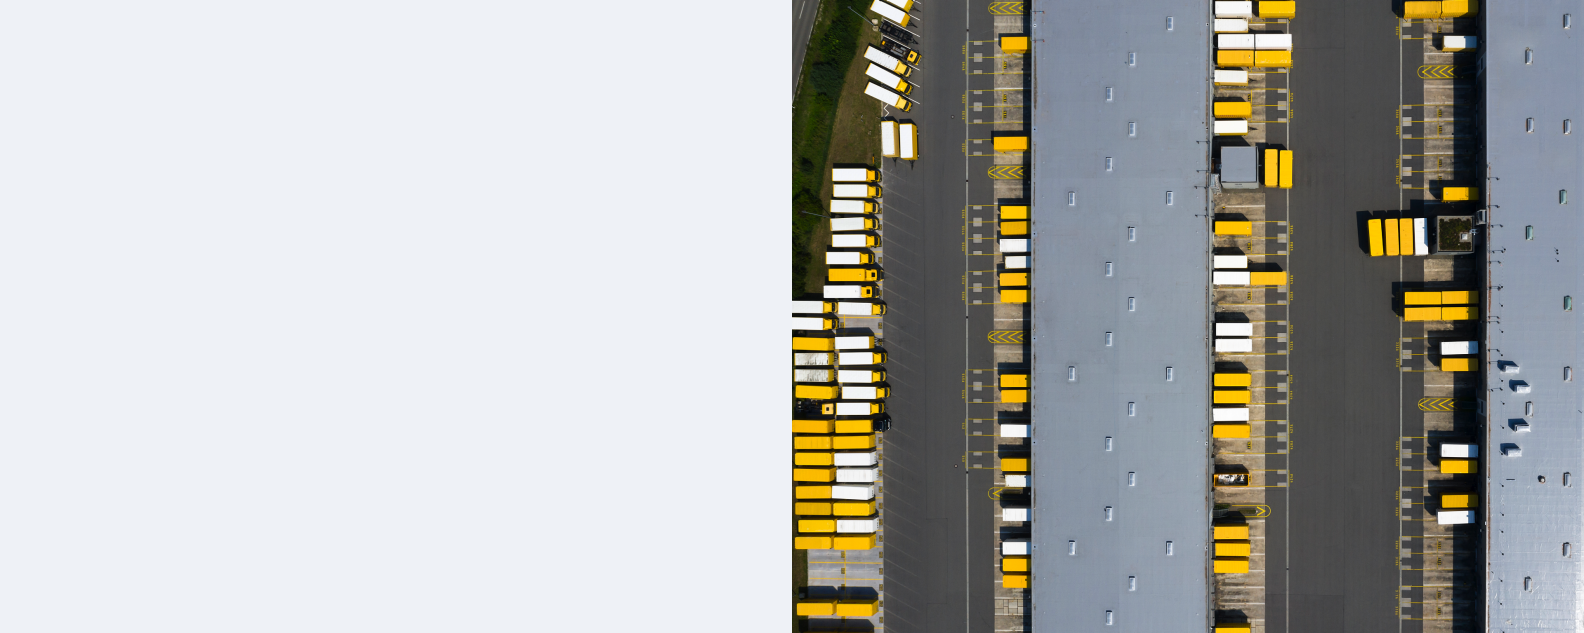 Overhead view of delivery trucks